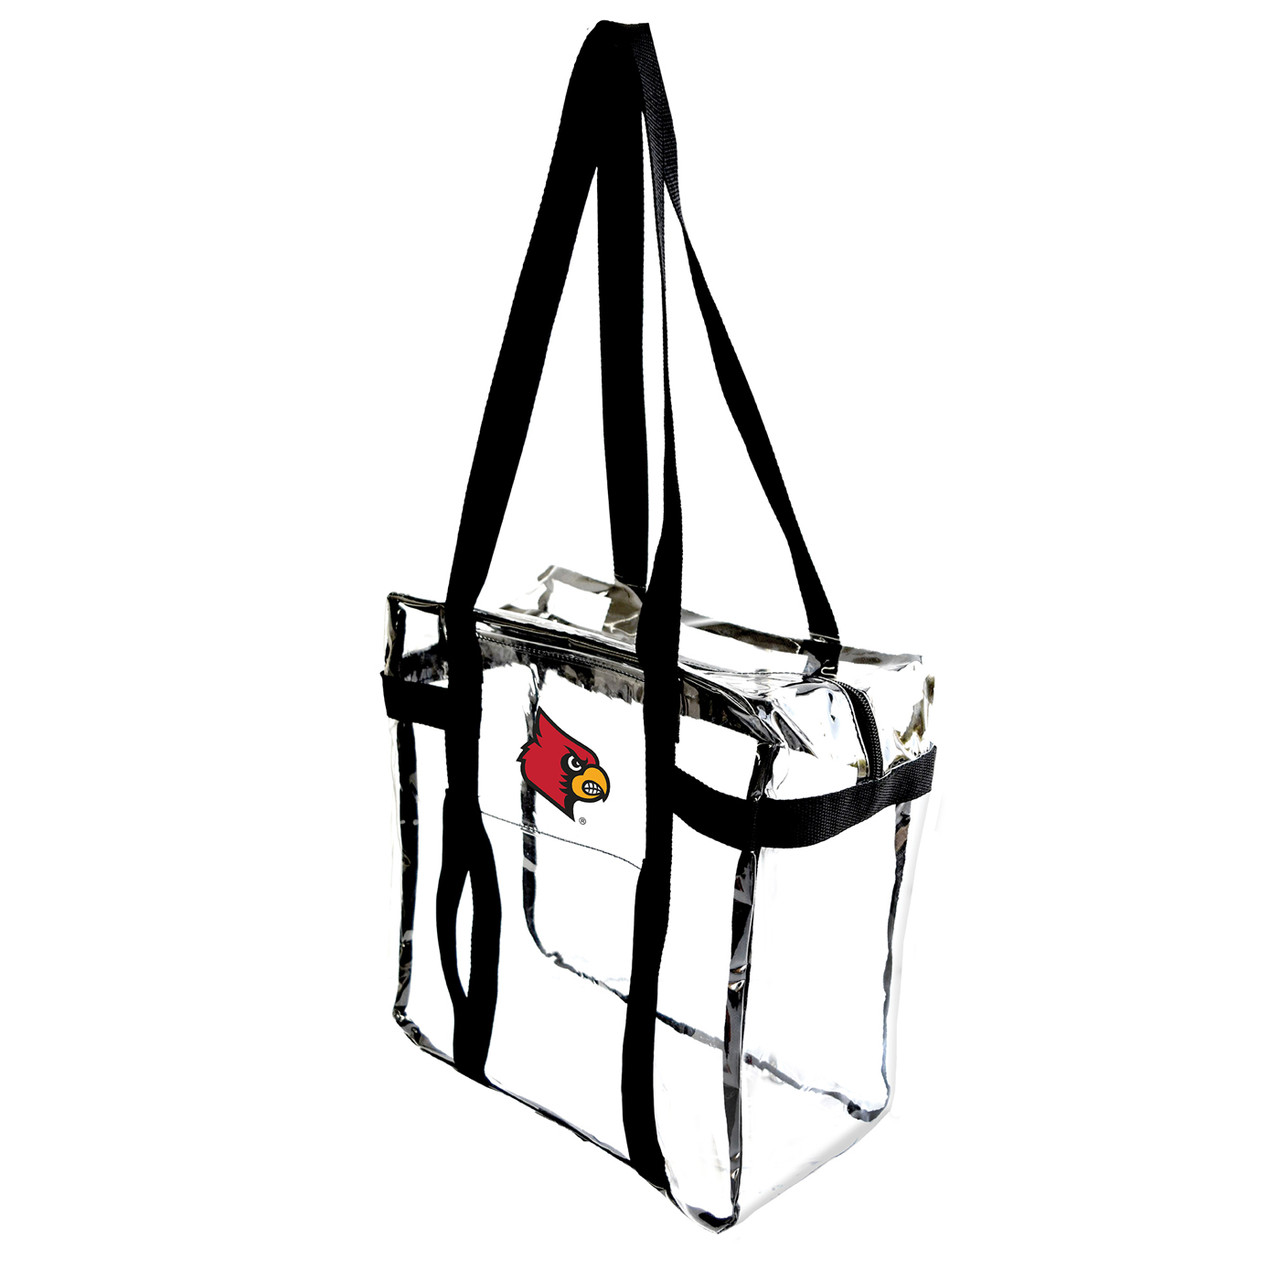 Louisville Cardinals Gameday Clear Crossbody Tote - Sports Unlimited